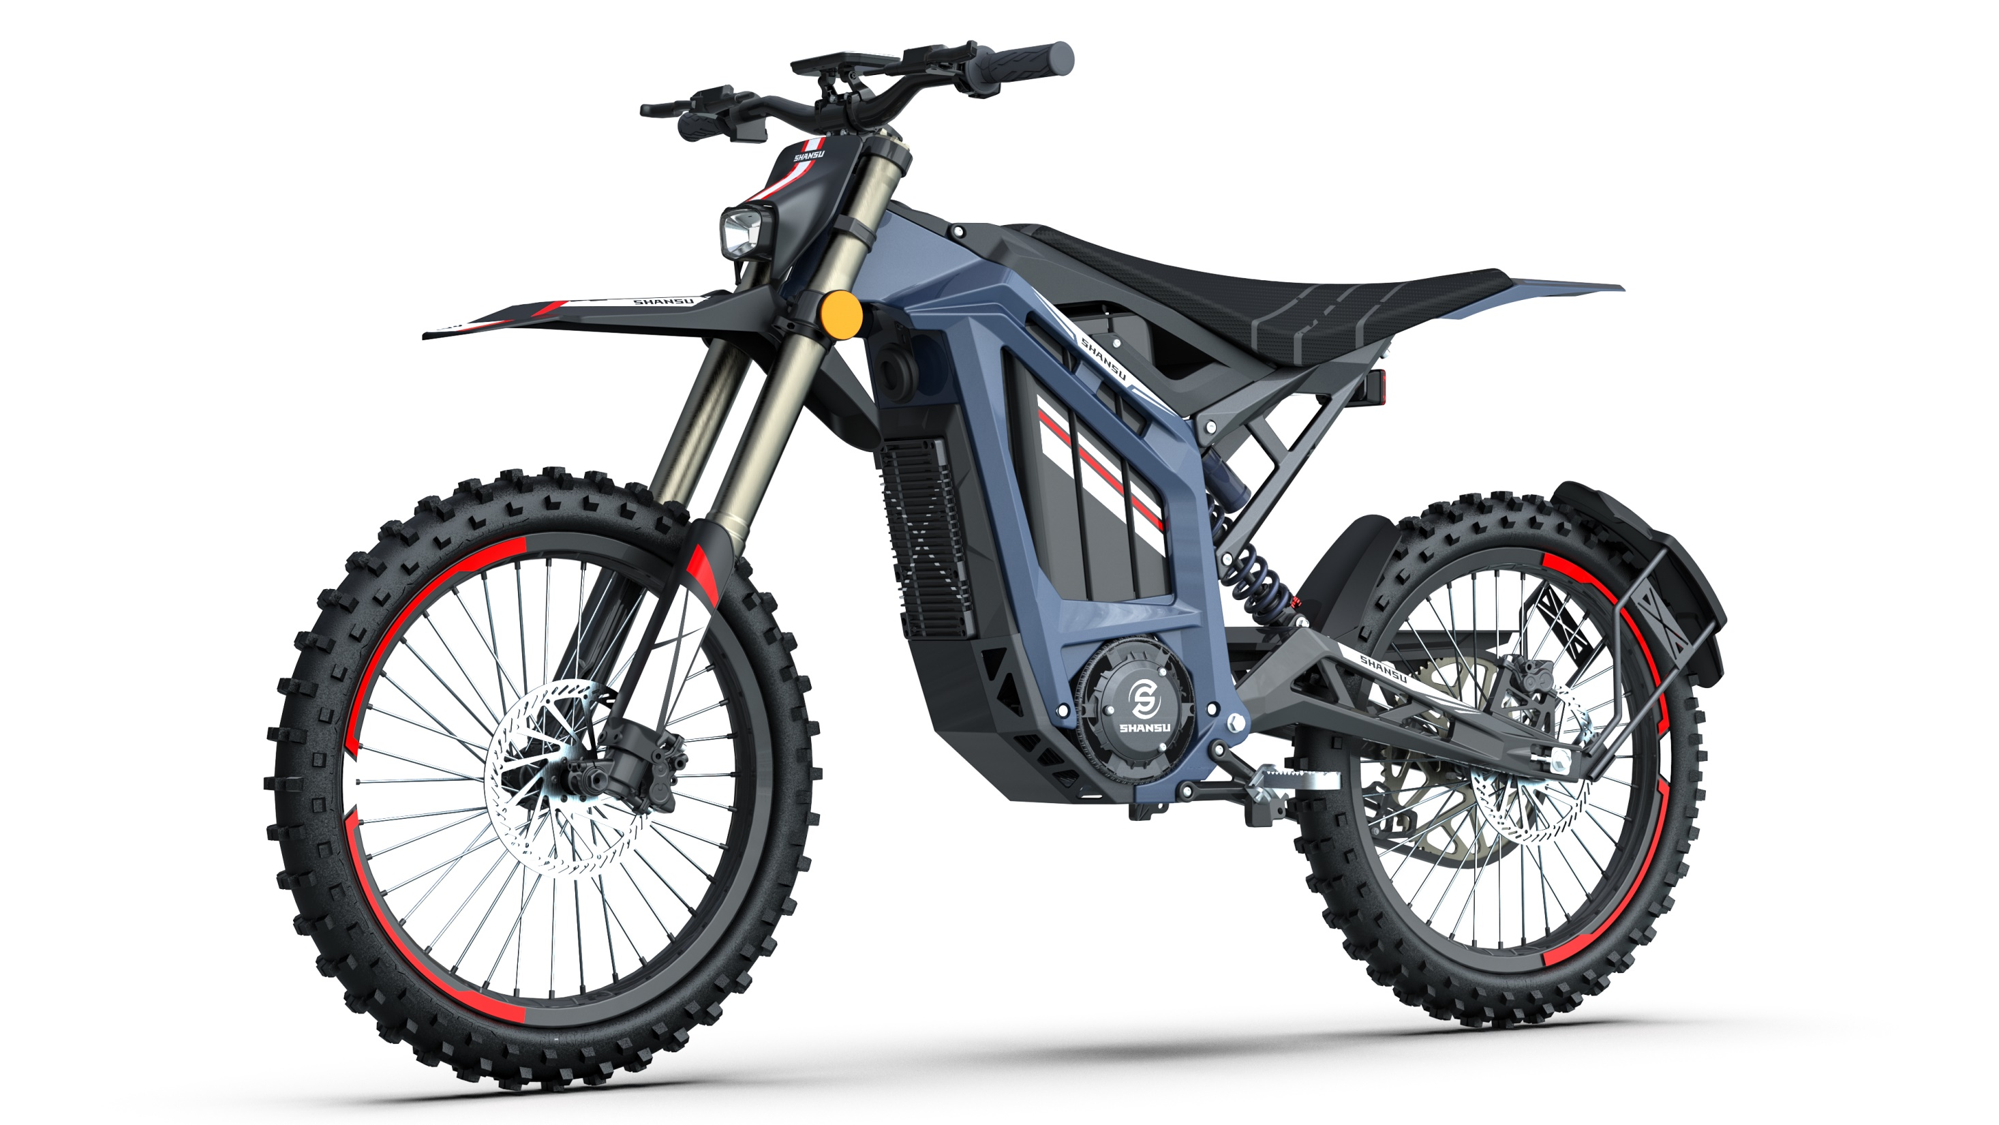 3000W 40ah Battery Electric Motorcycle With Off-Road Tires